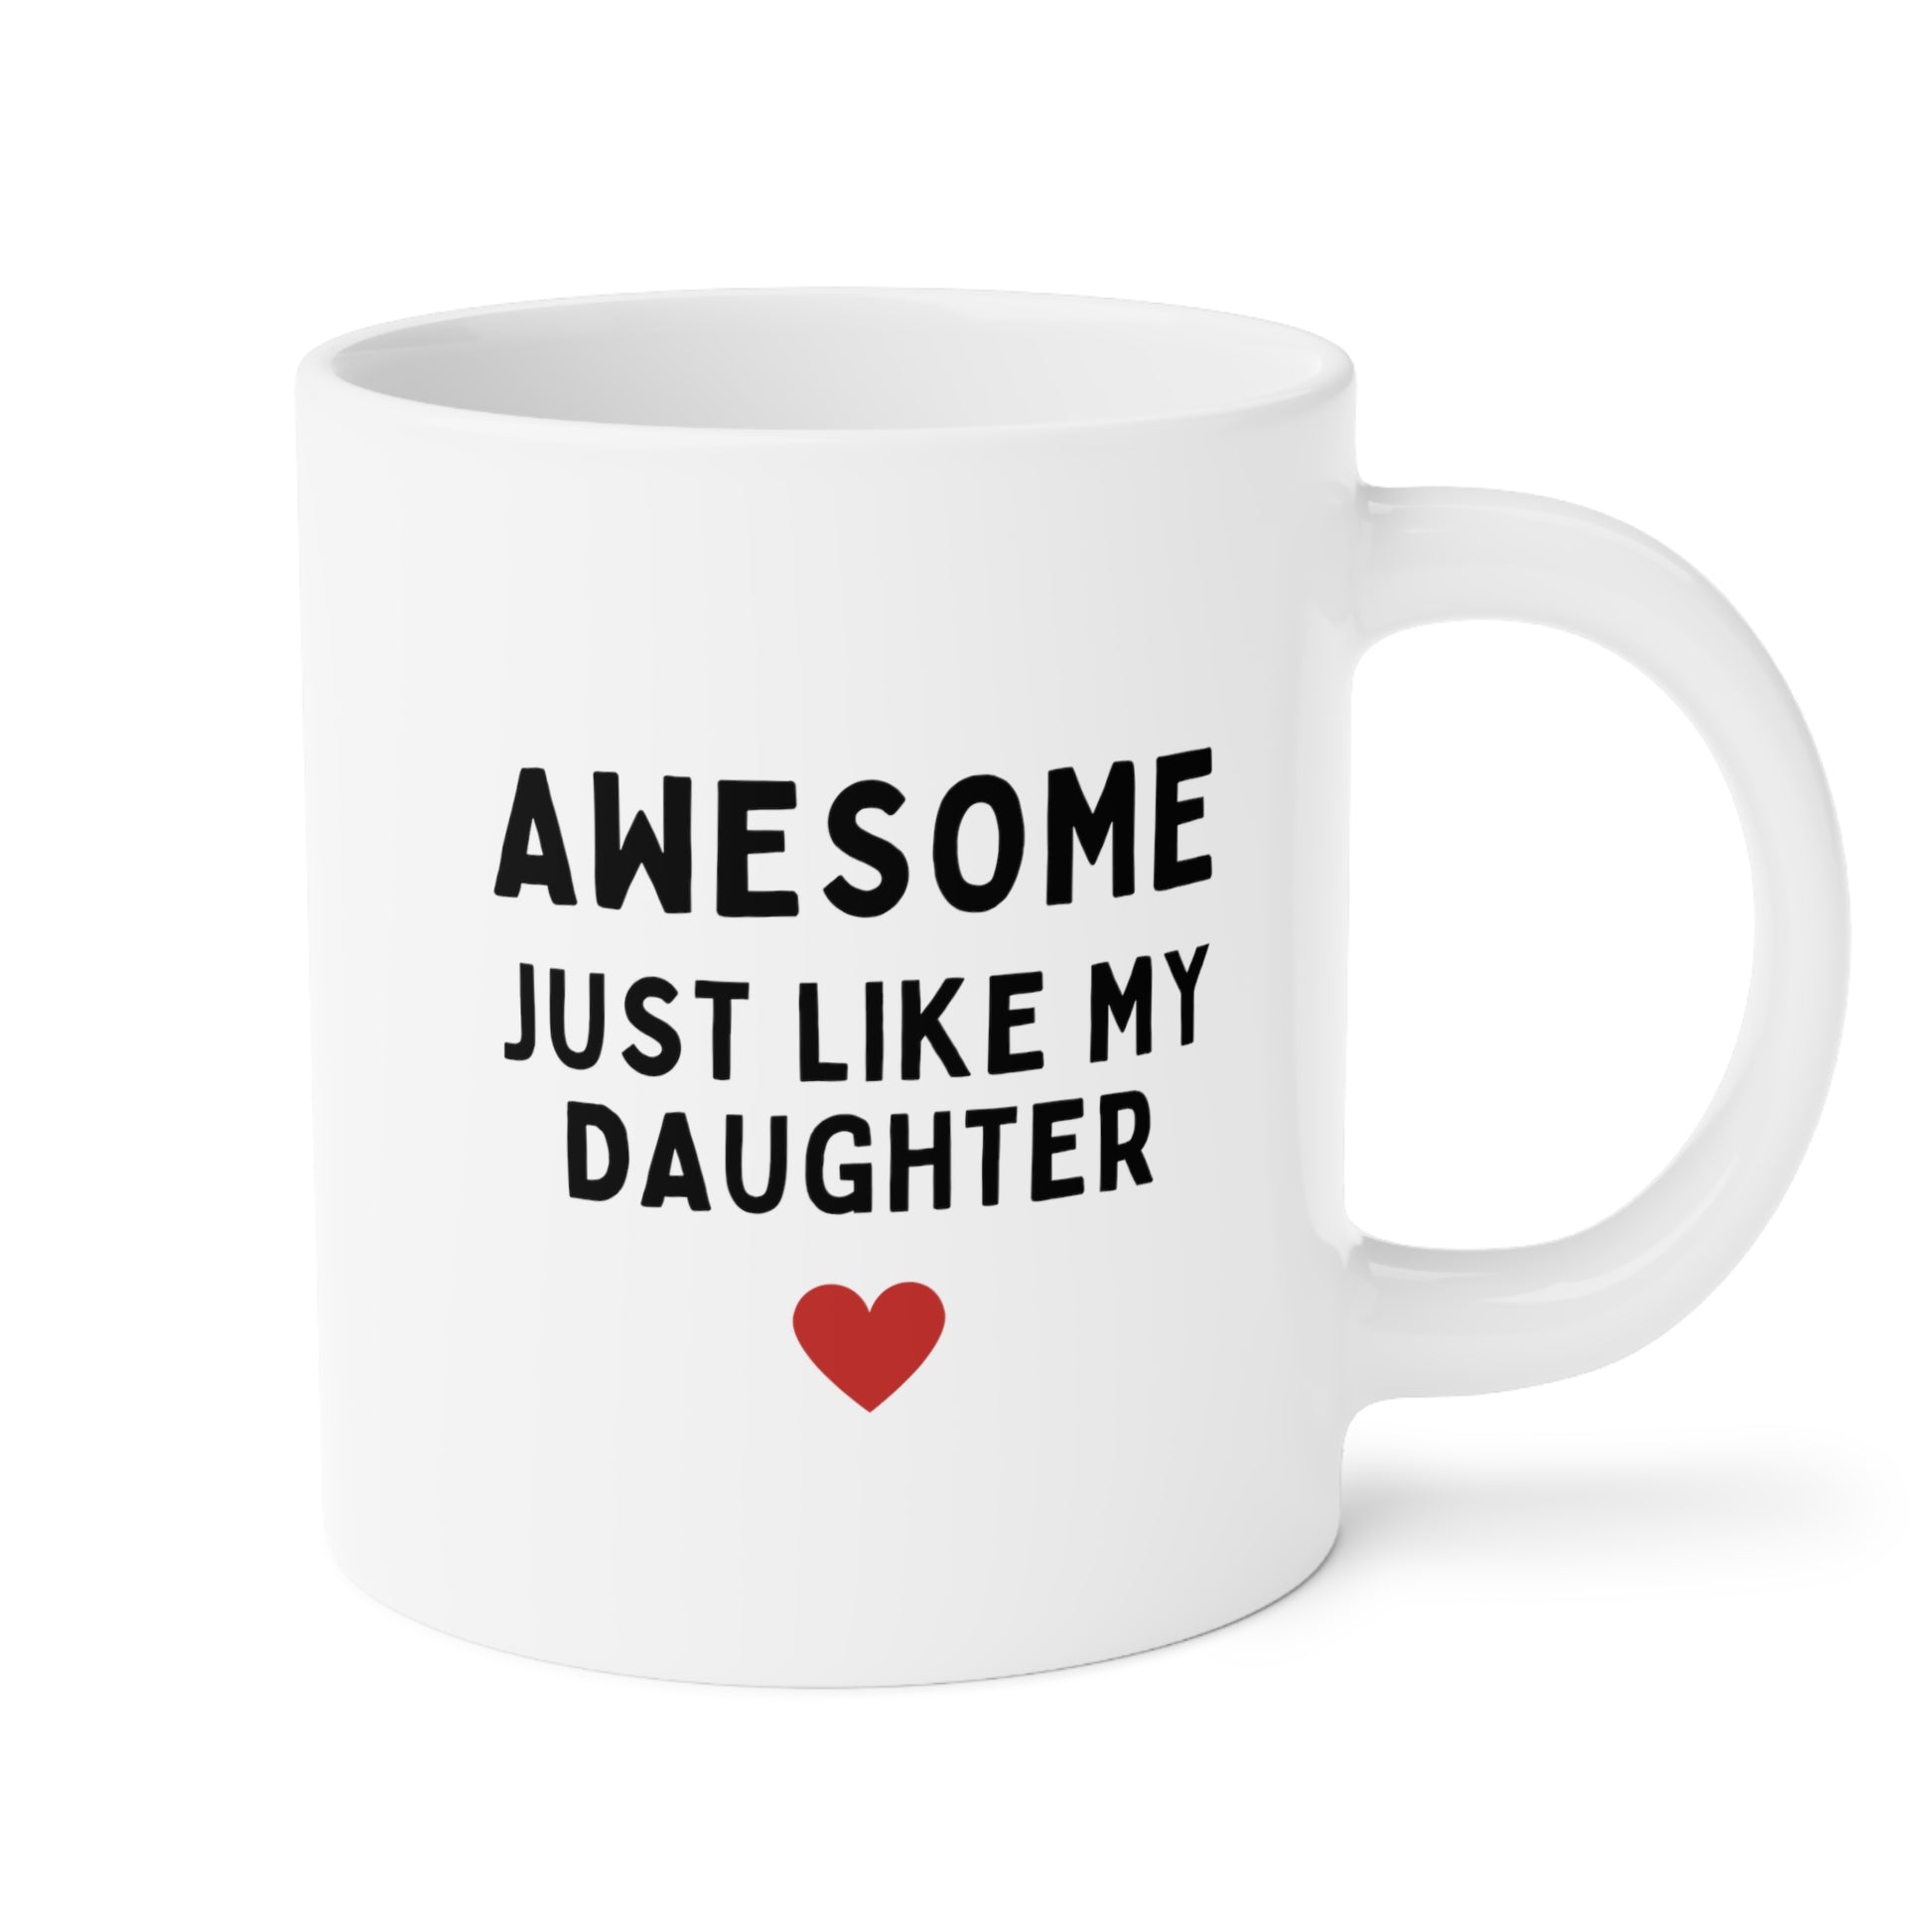 Awesome Just Like My Daughter 20oz white funny large coffee mug gift for husband daughter to dad fathers day cup waveywares wavey wares wavywares wavy wares